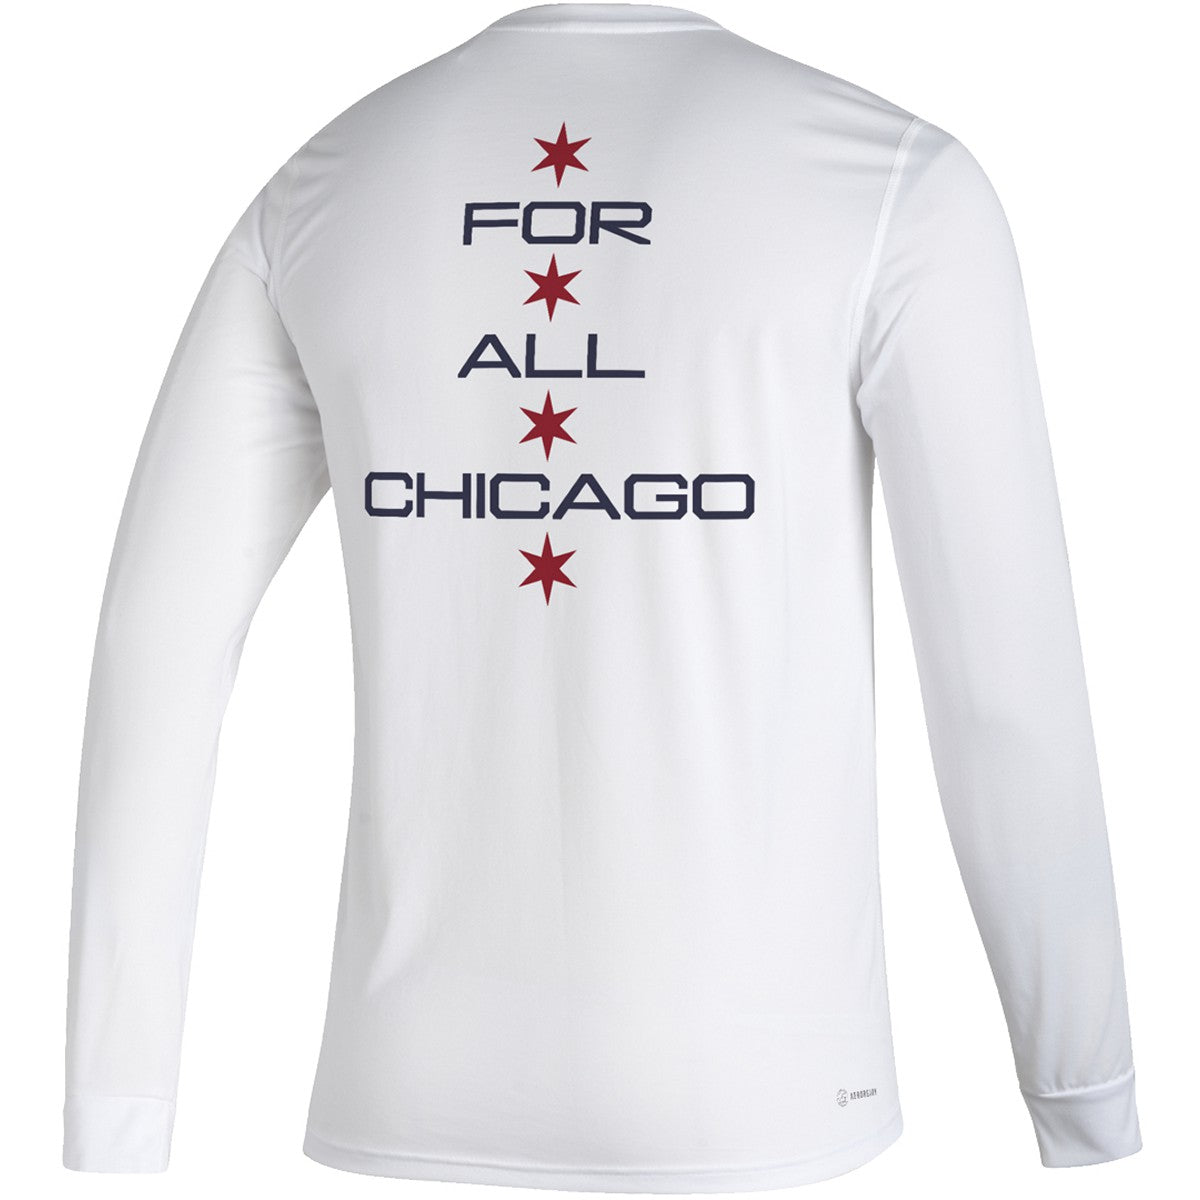 Adidas Chicago Fire For All Chicago Long Sleeve T-Shirt